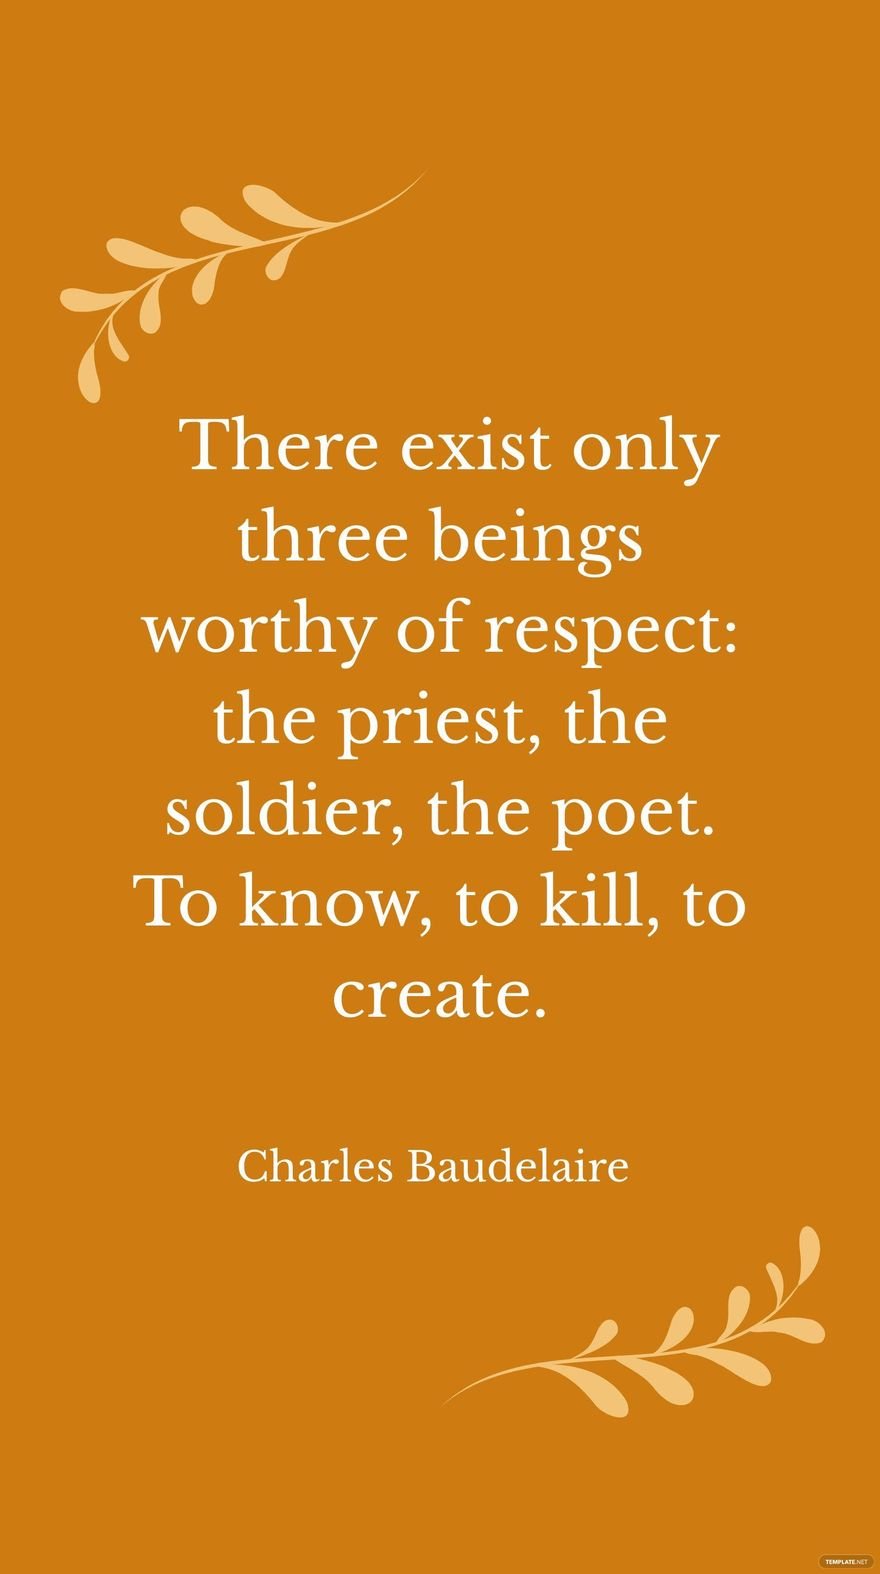 Charles Baudelaire- There exist only three beings worthy of respect: the priest, the soldier, the poet. To know, to kill, to create.